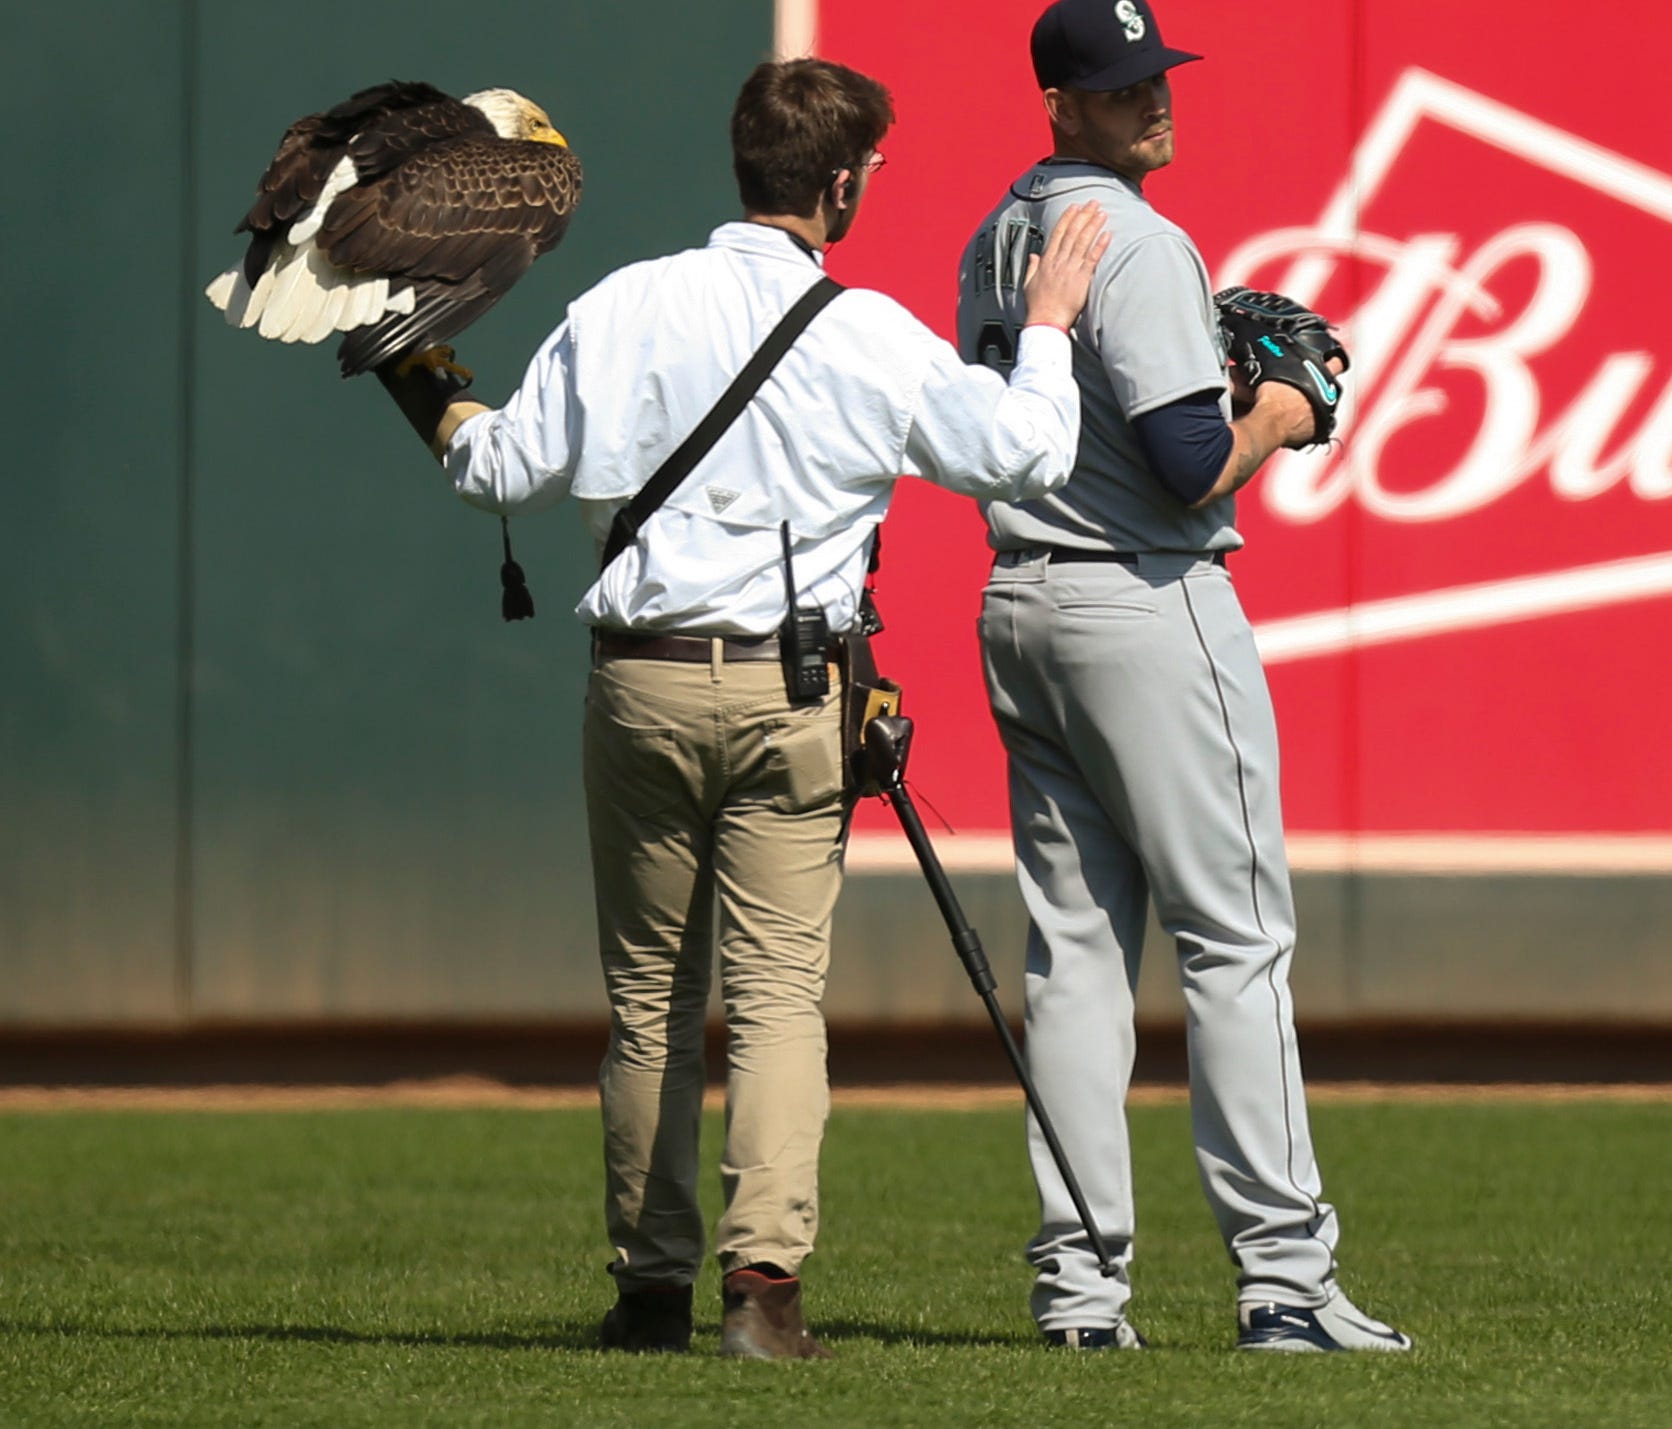 The handler for an American eagle that was to fly to the pitcher's mound during the national anthem pats Seattle Mariners starting pitcher James Paxton, a Canadian, after the eagle chose to land on his shoulder instead.